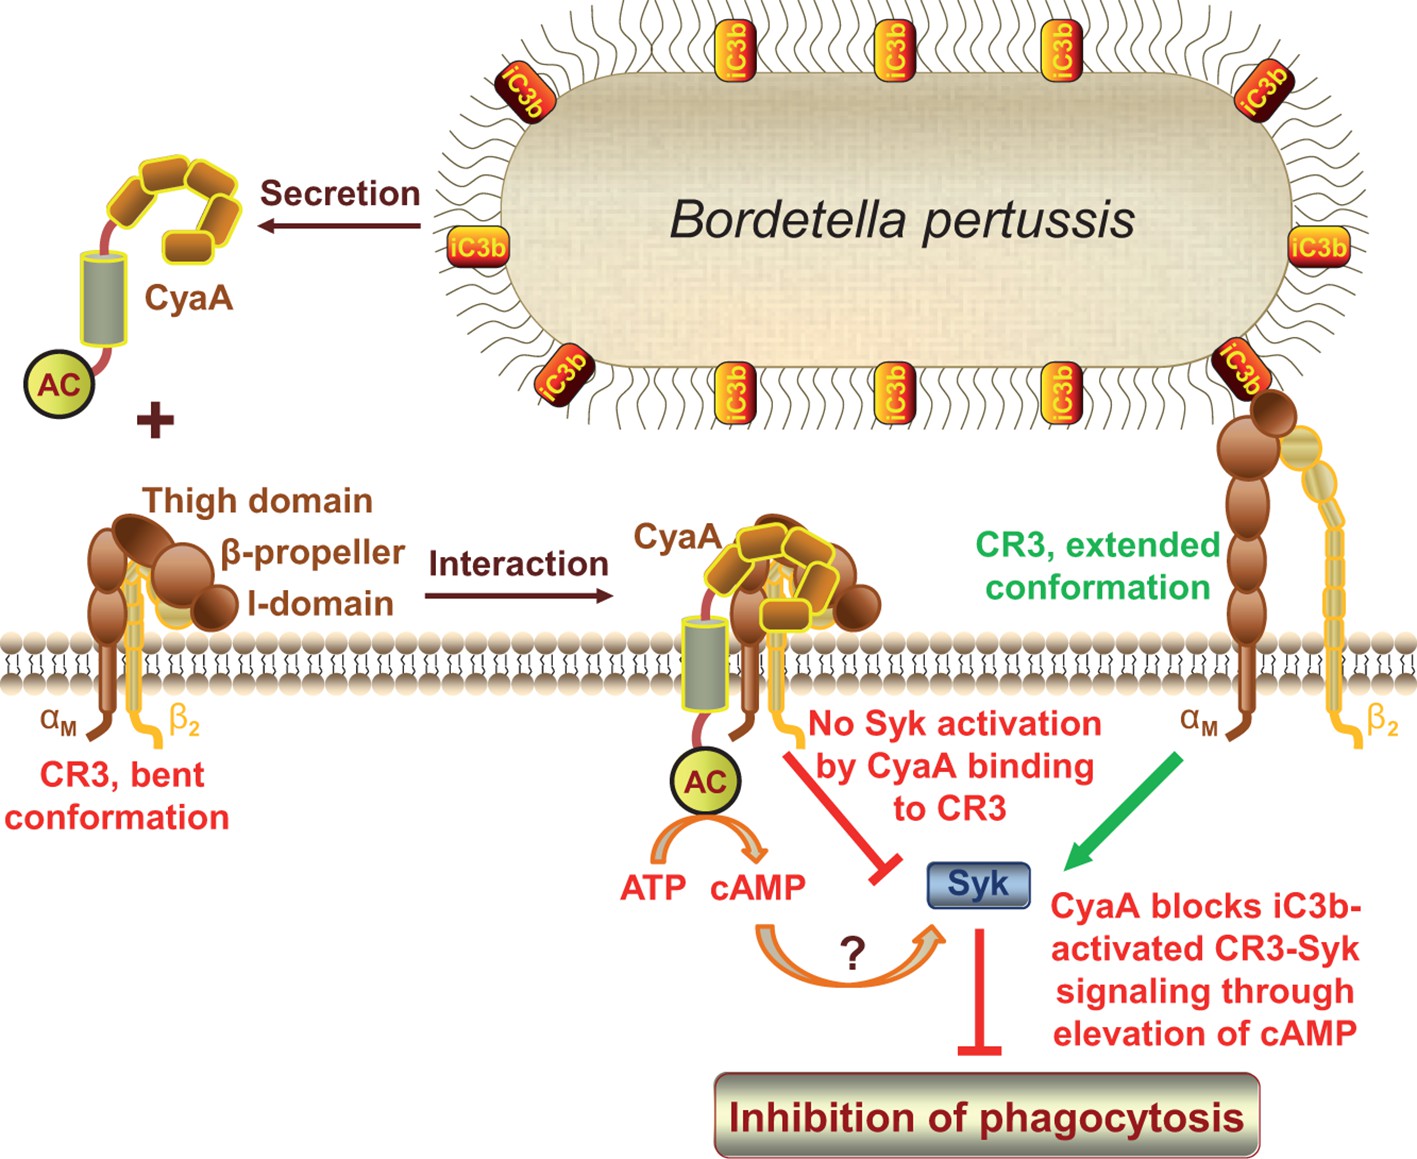 Bordetella adenylate cyclase toxin is a unique ligand of the integrin